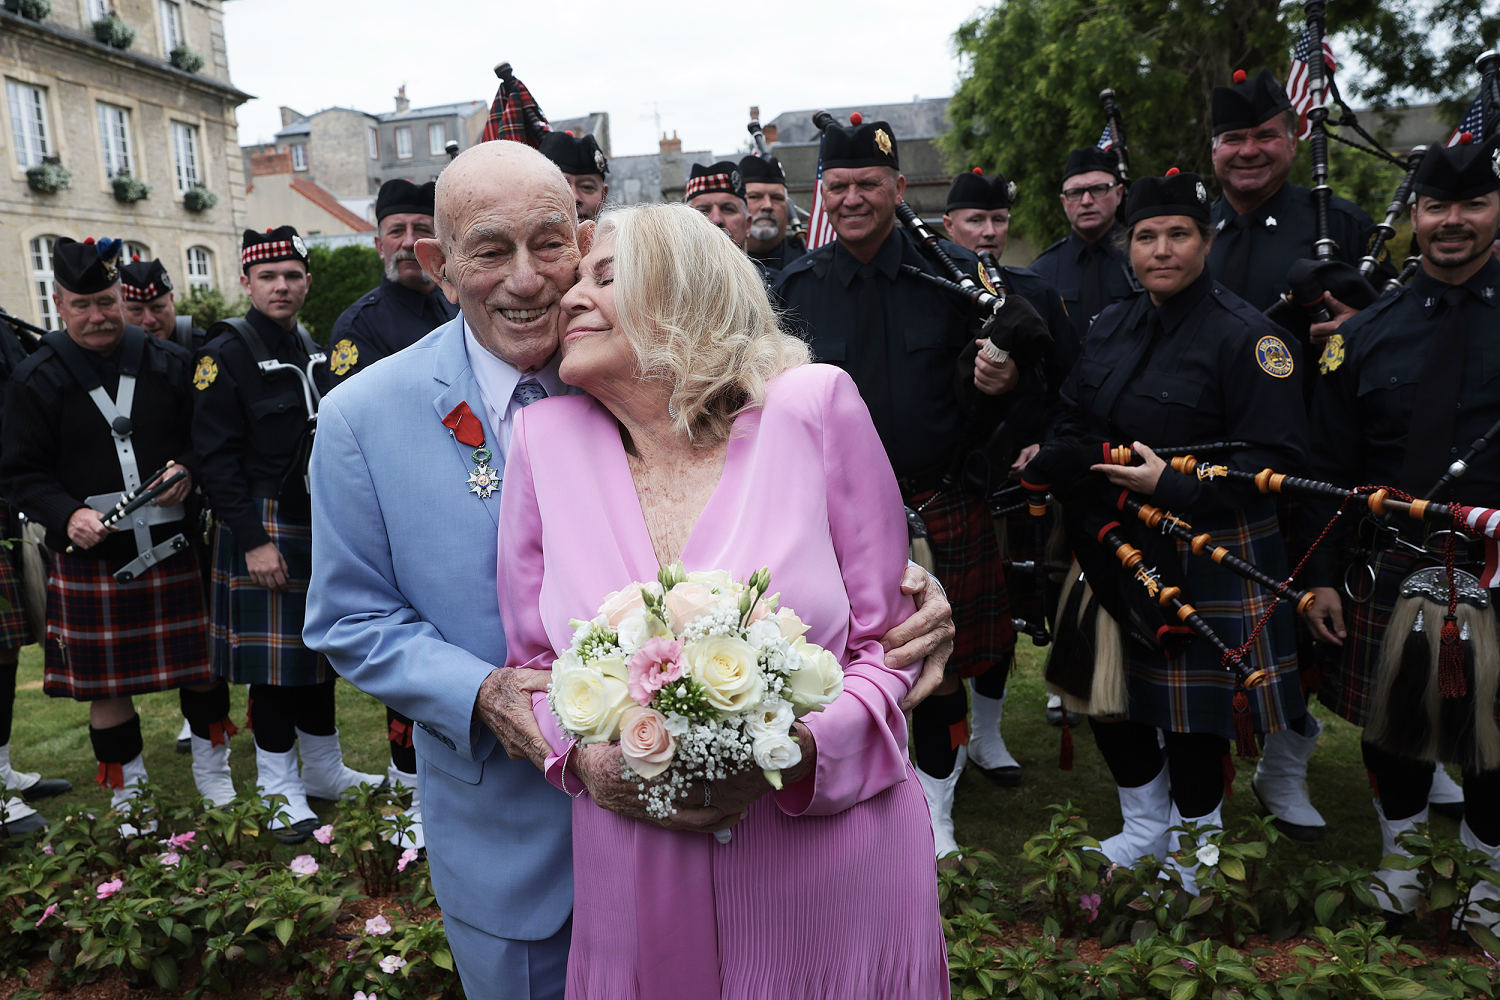 100-year-old U.S. veteran returns to Normandy and marries bride after D-Day memorials